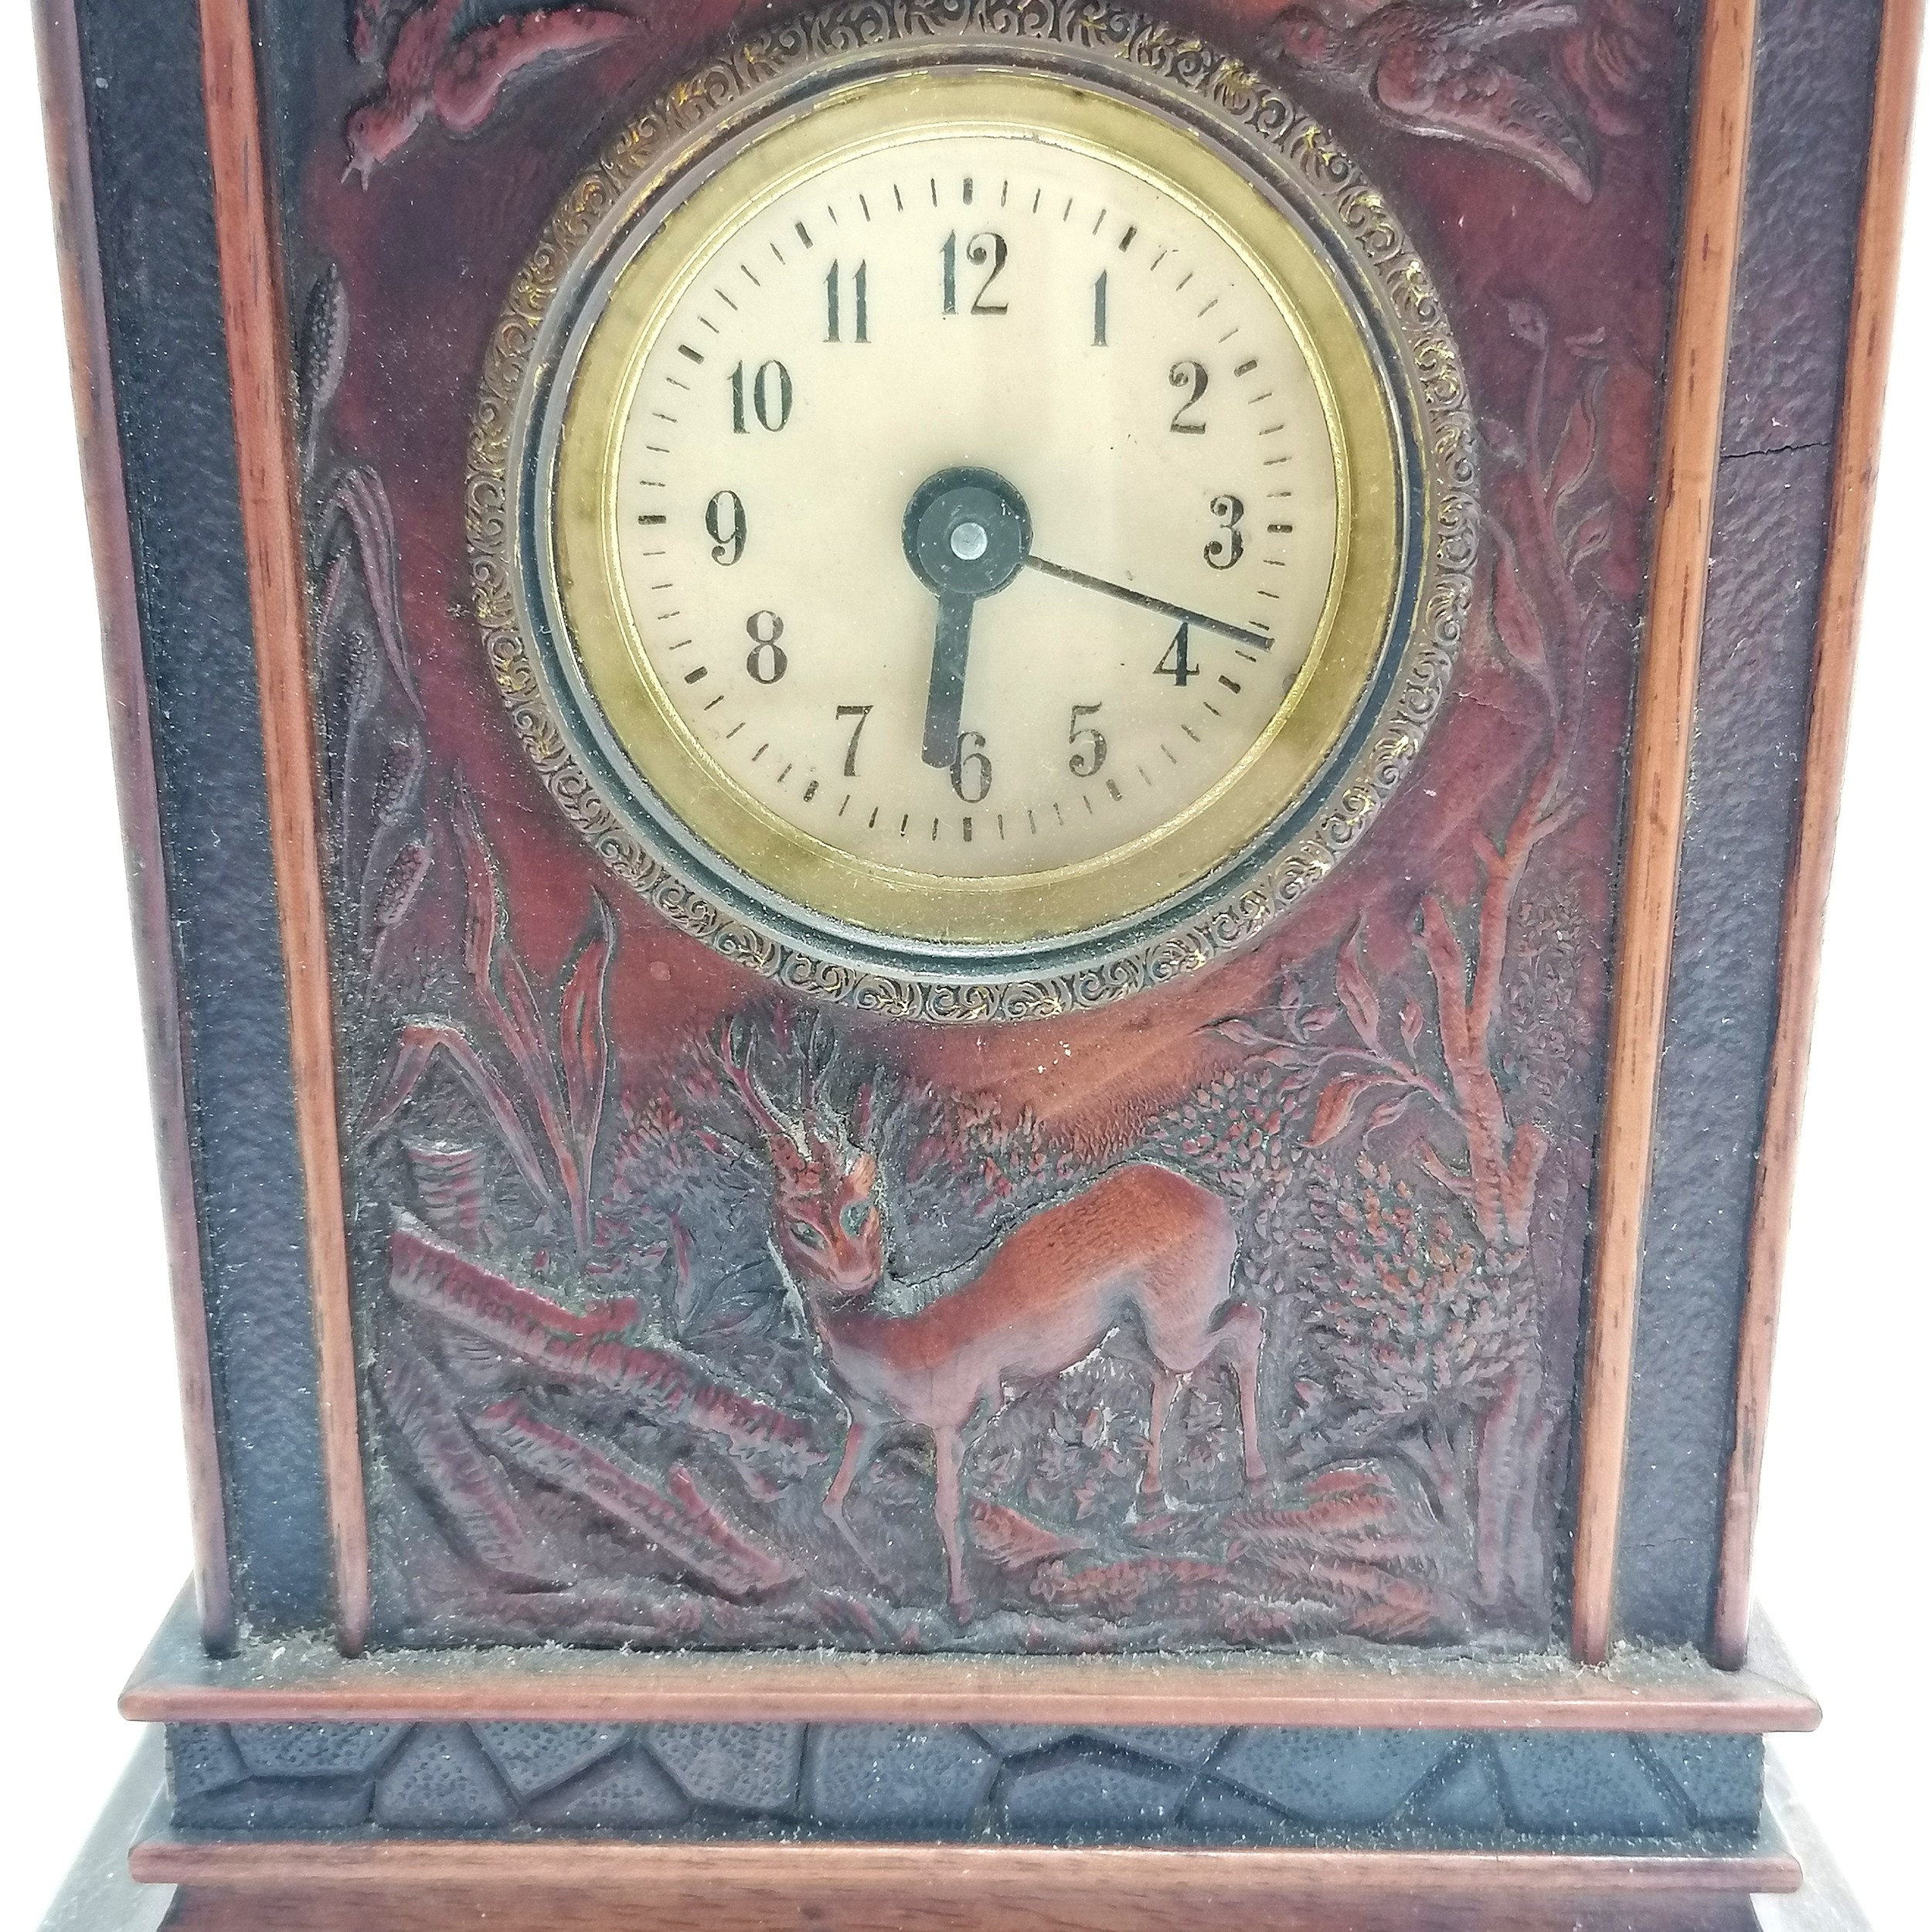 Black forest hand carved wooden clock with front panel decorated with deer & birds - 29cm high x - Image 4 of 4